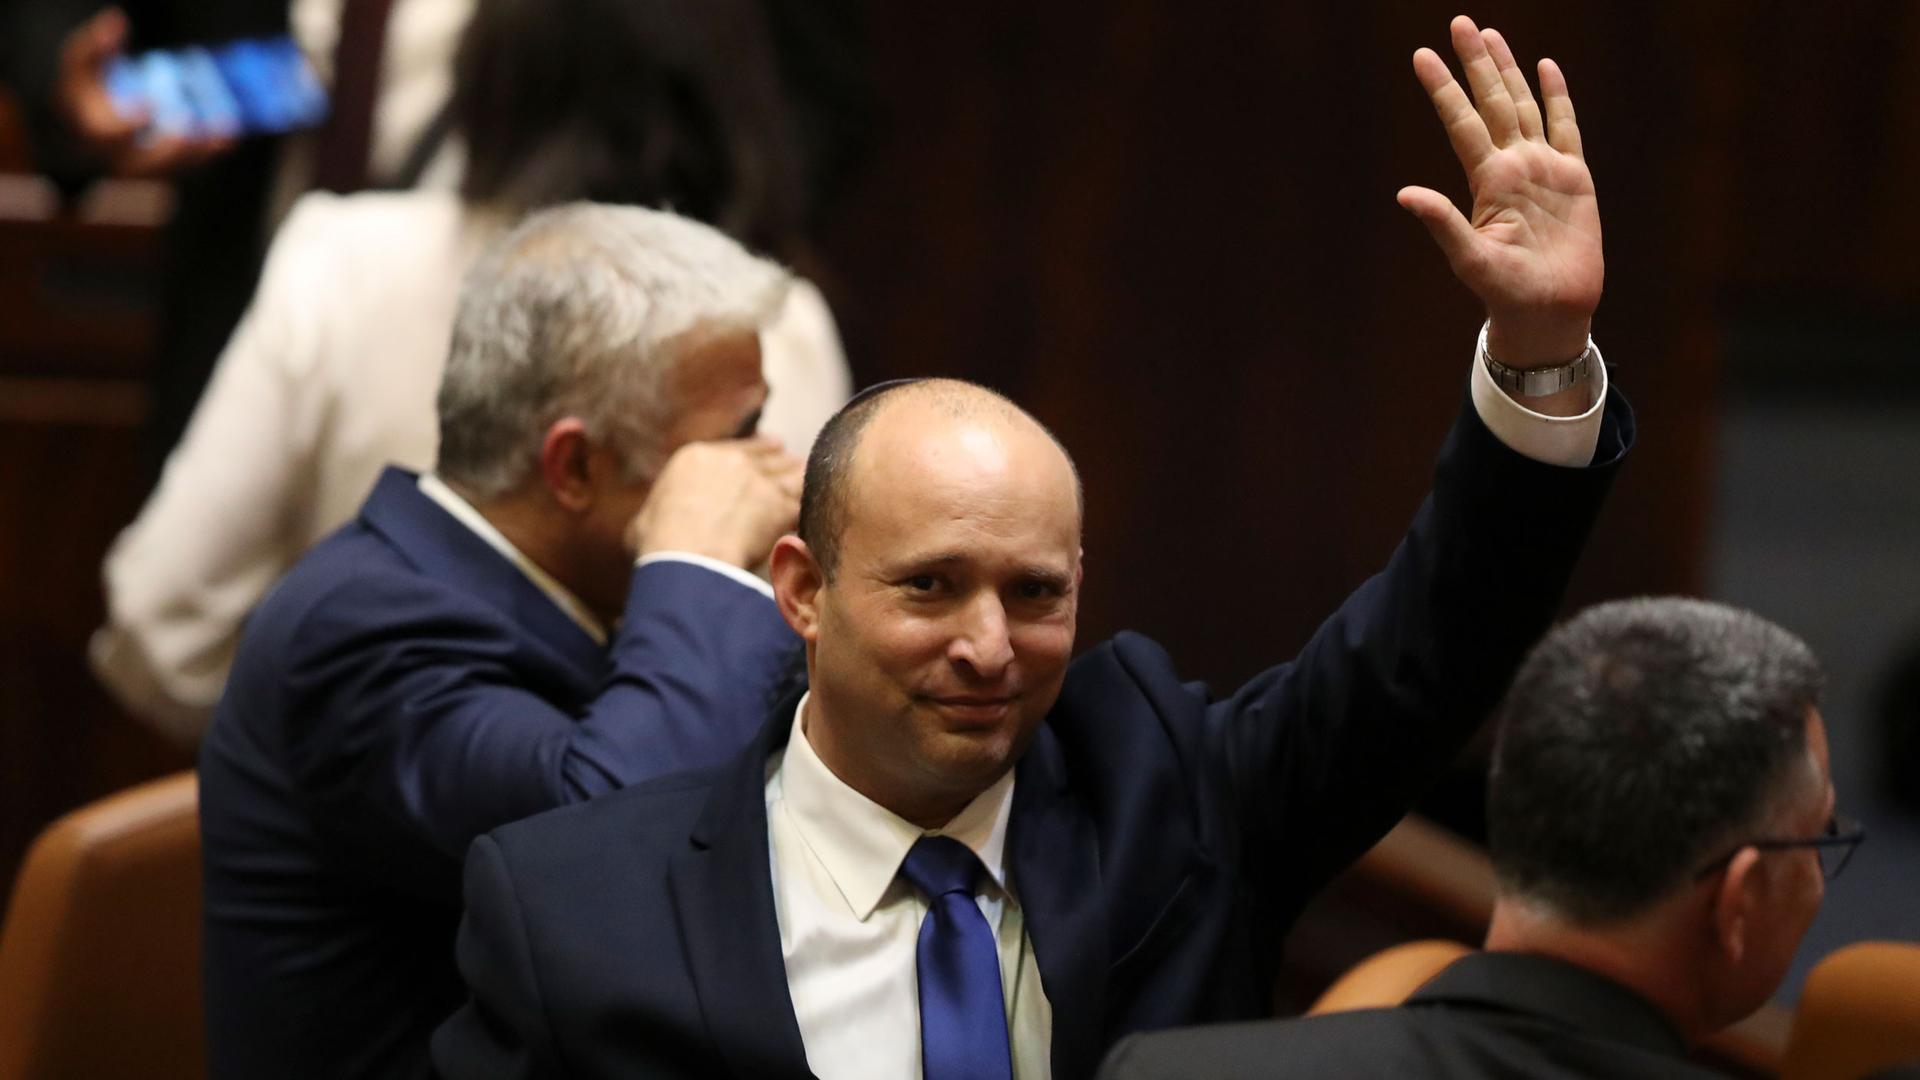 Naftali Bennett is shown wearing a dark suit and raising his right hand in the air.